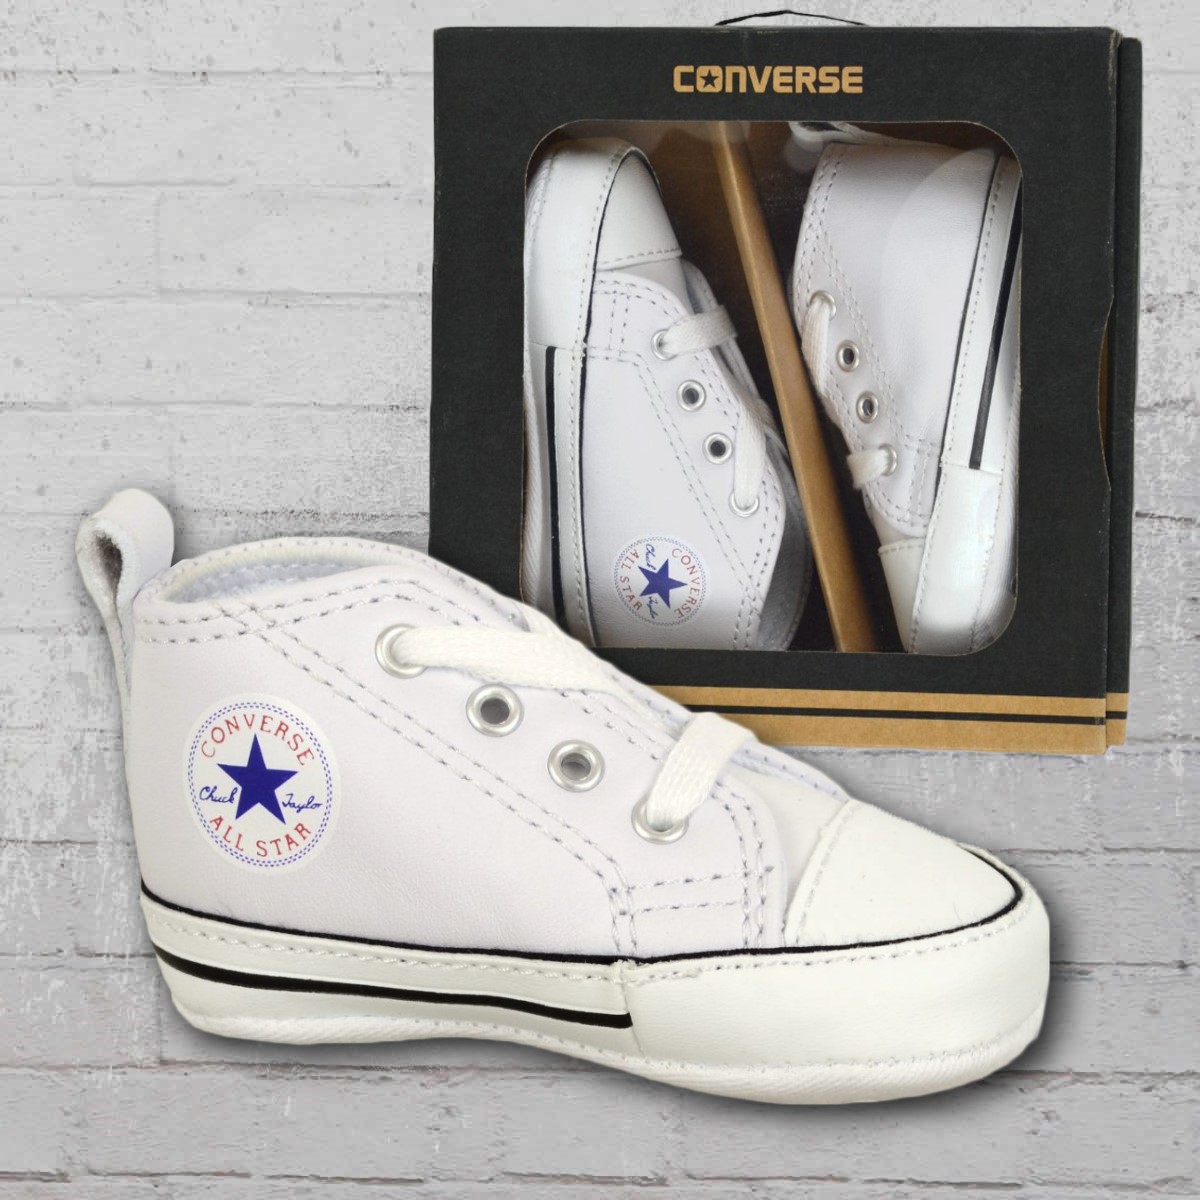 converse baby first star